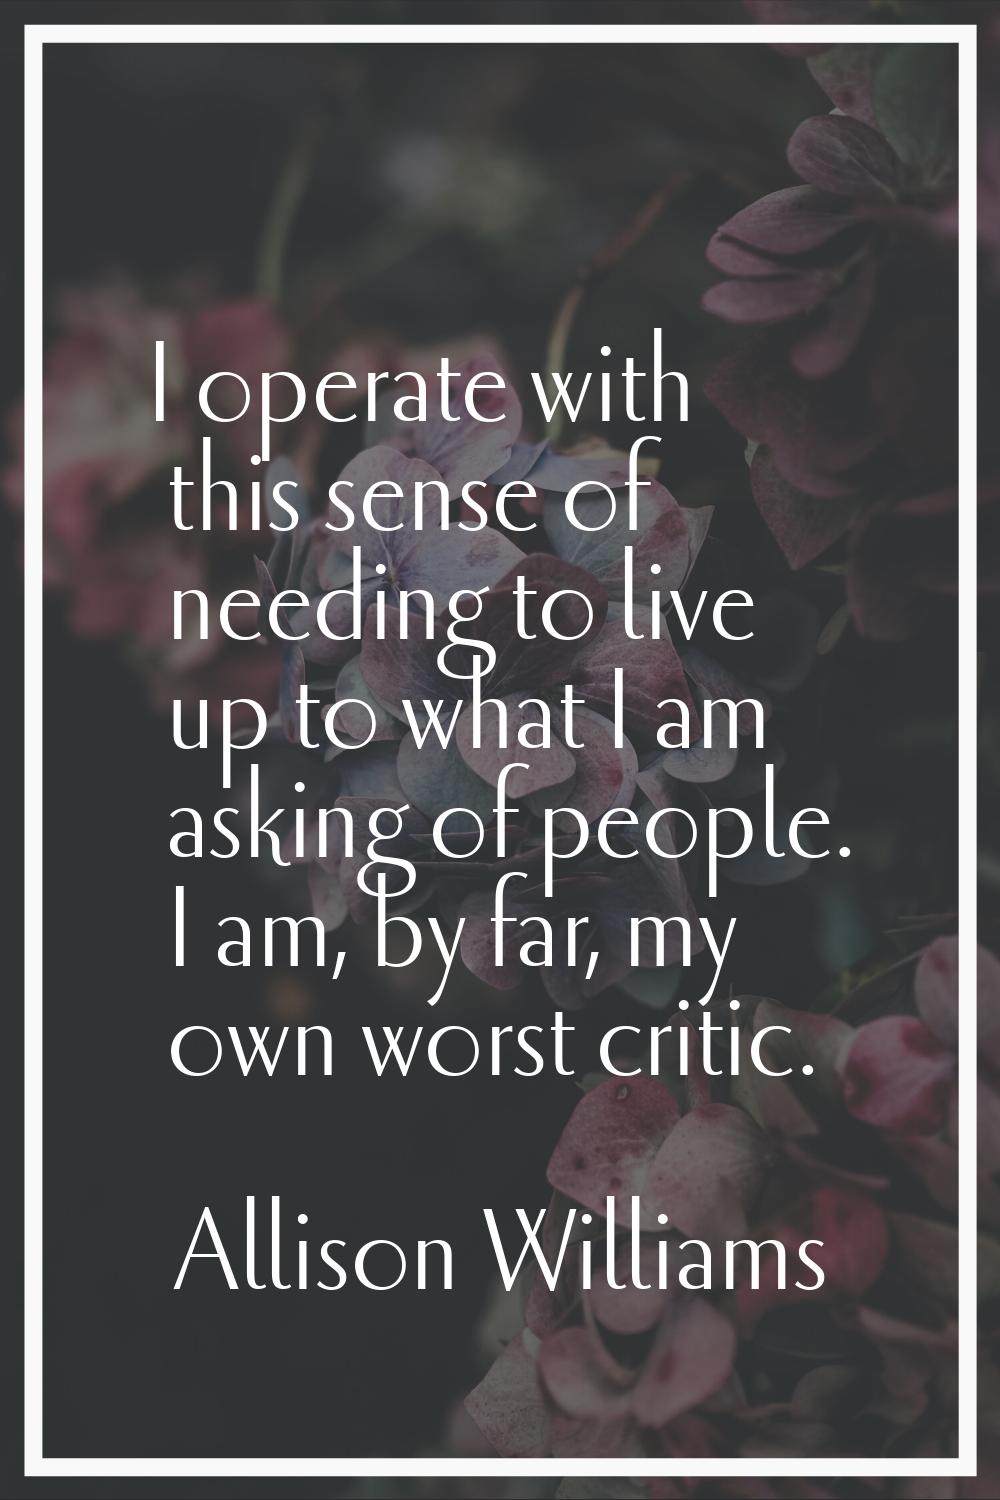 I operate with this sense of needing to live up to what I am asking of people. I am, by far, my own